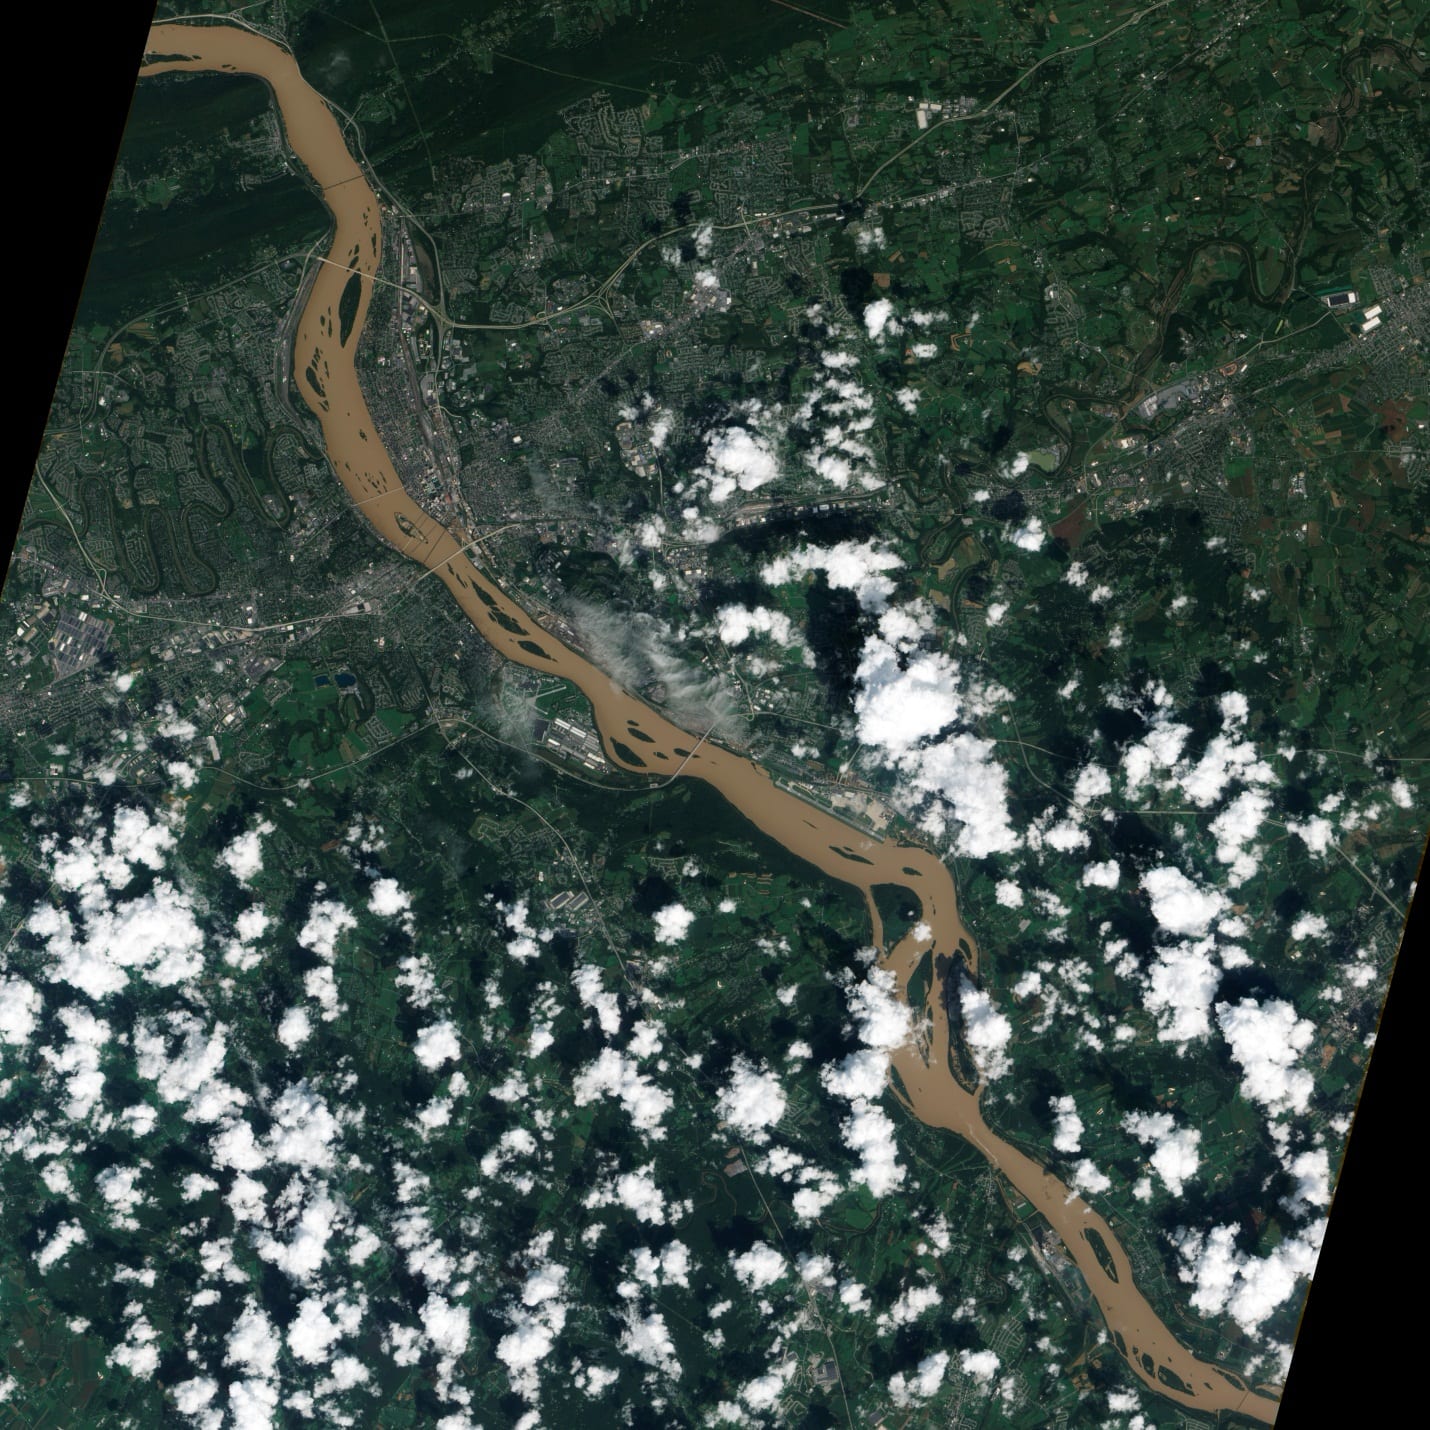 The Susquehanna flows through the city and appears confined within its embankments. Image Source: NASA Earth Observatory/Jesse Allen, Robert Simmon/ NASA EO-1 team